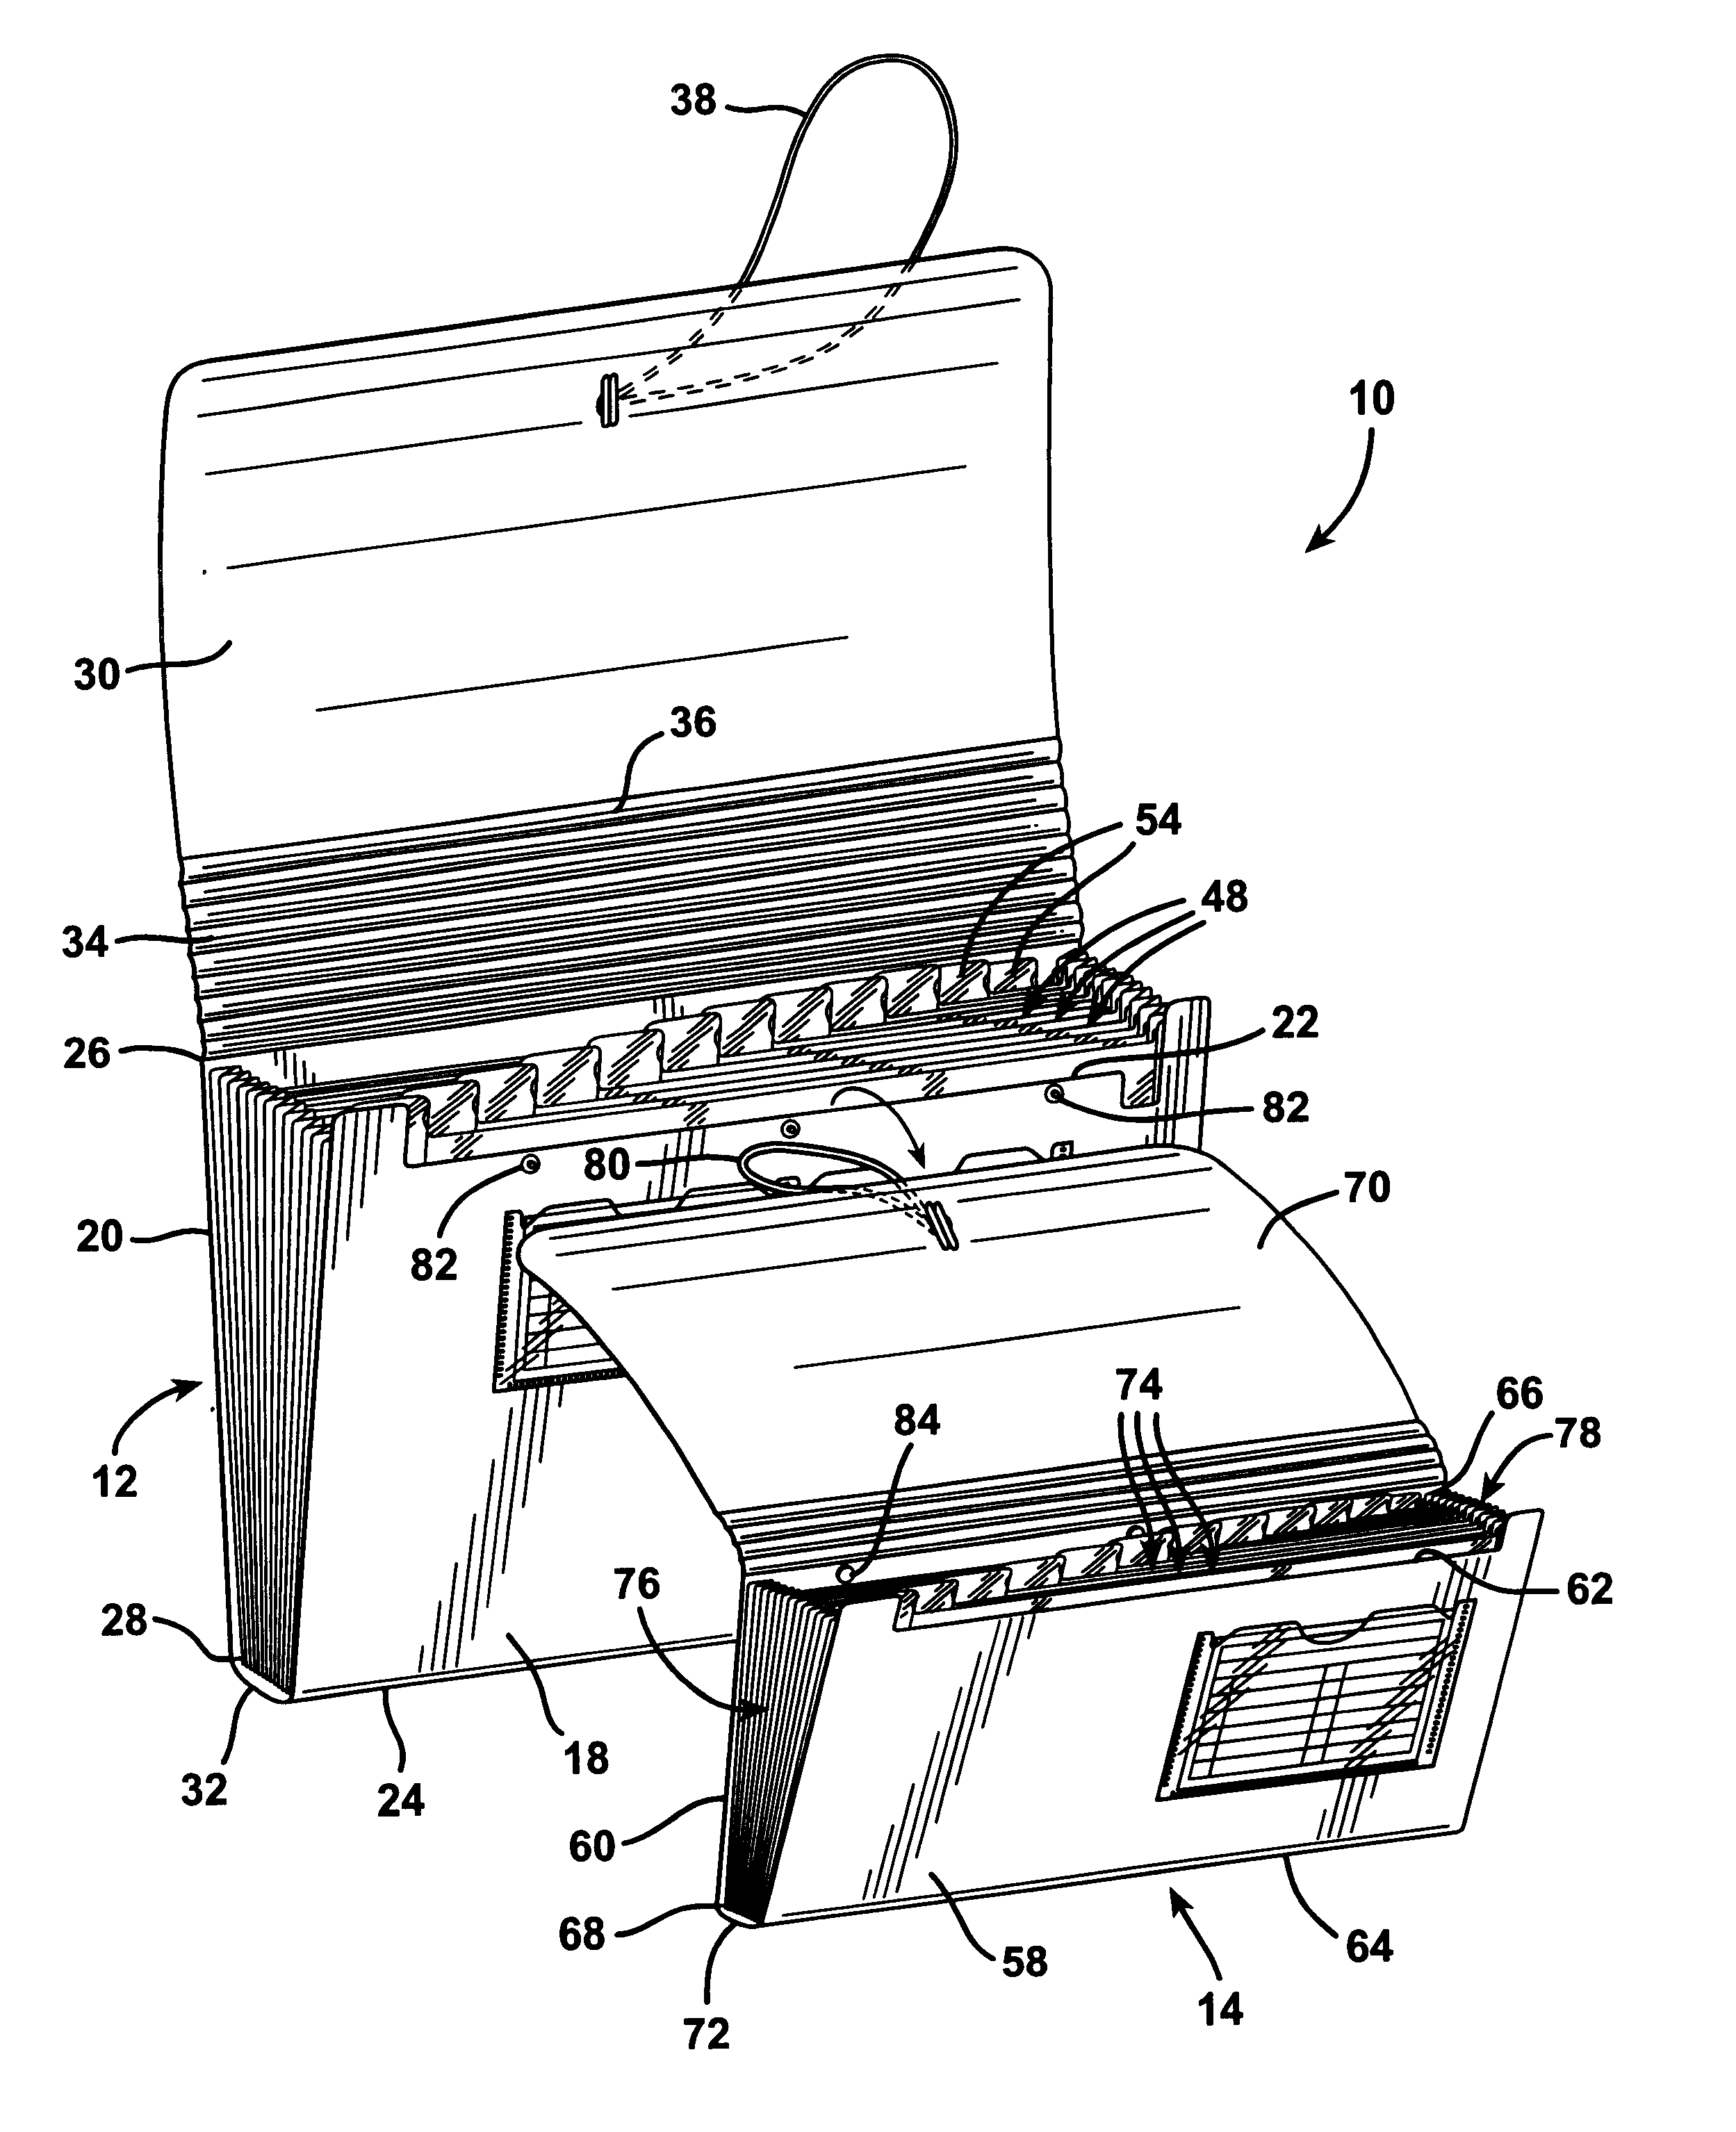 Combined detachable filing wallet devices